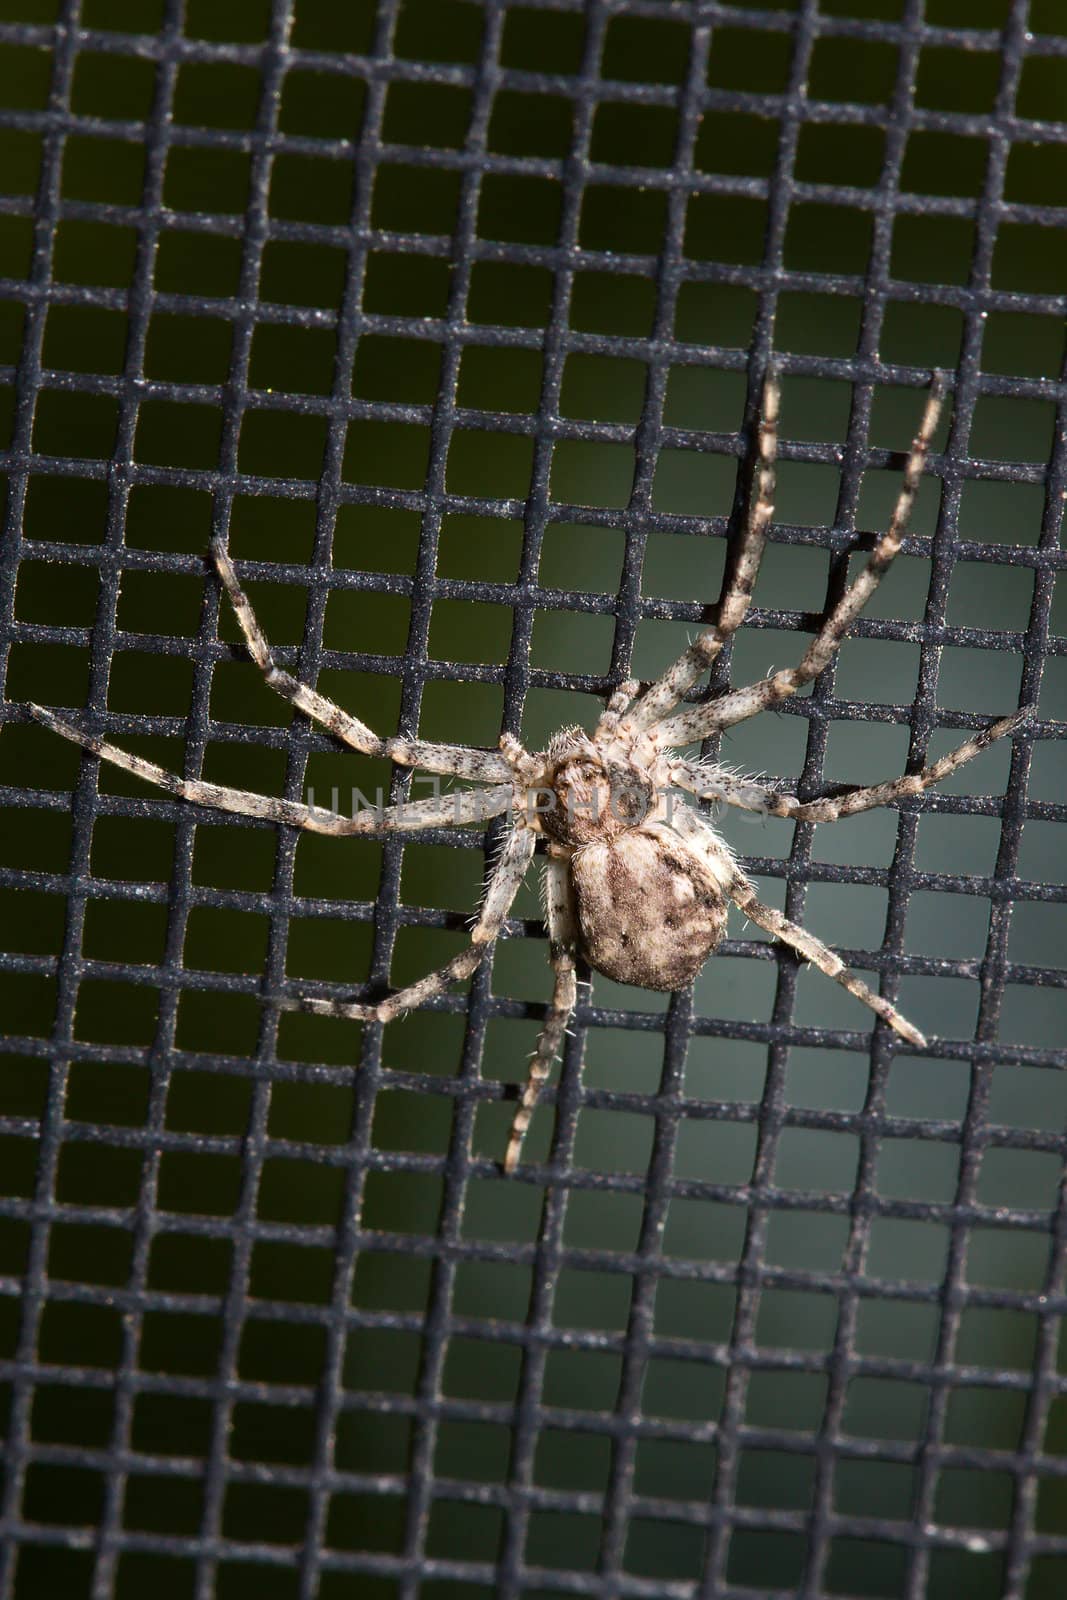 Hairy Spider on a black Window Screen.